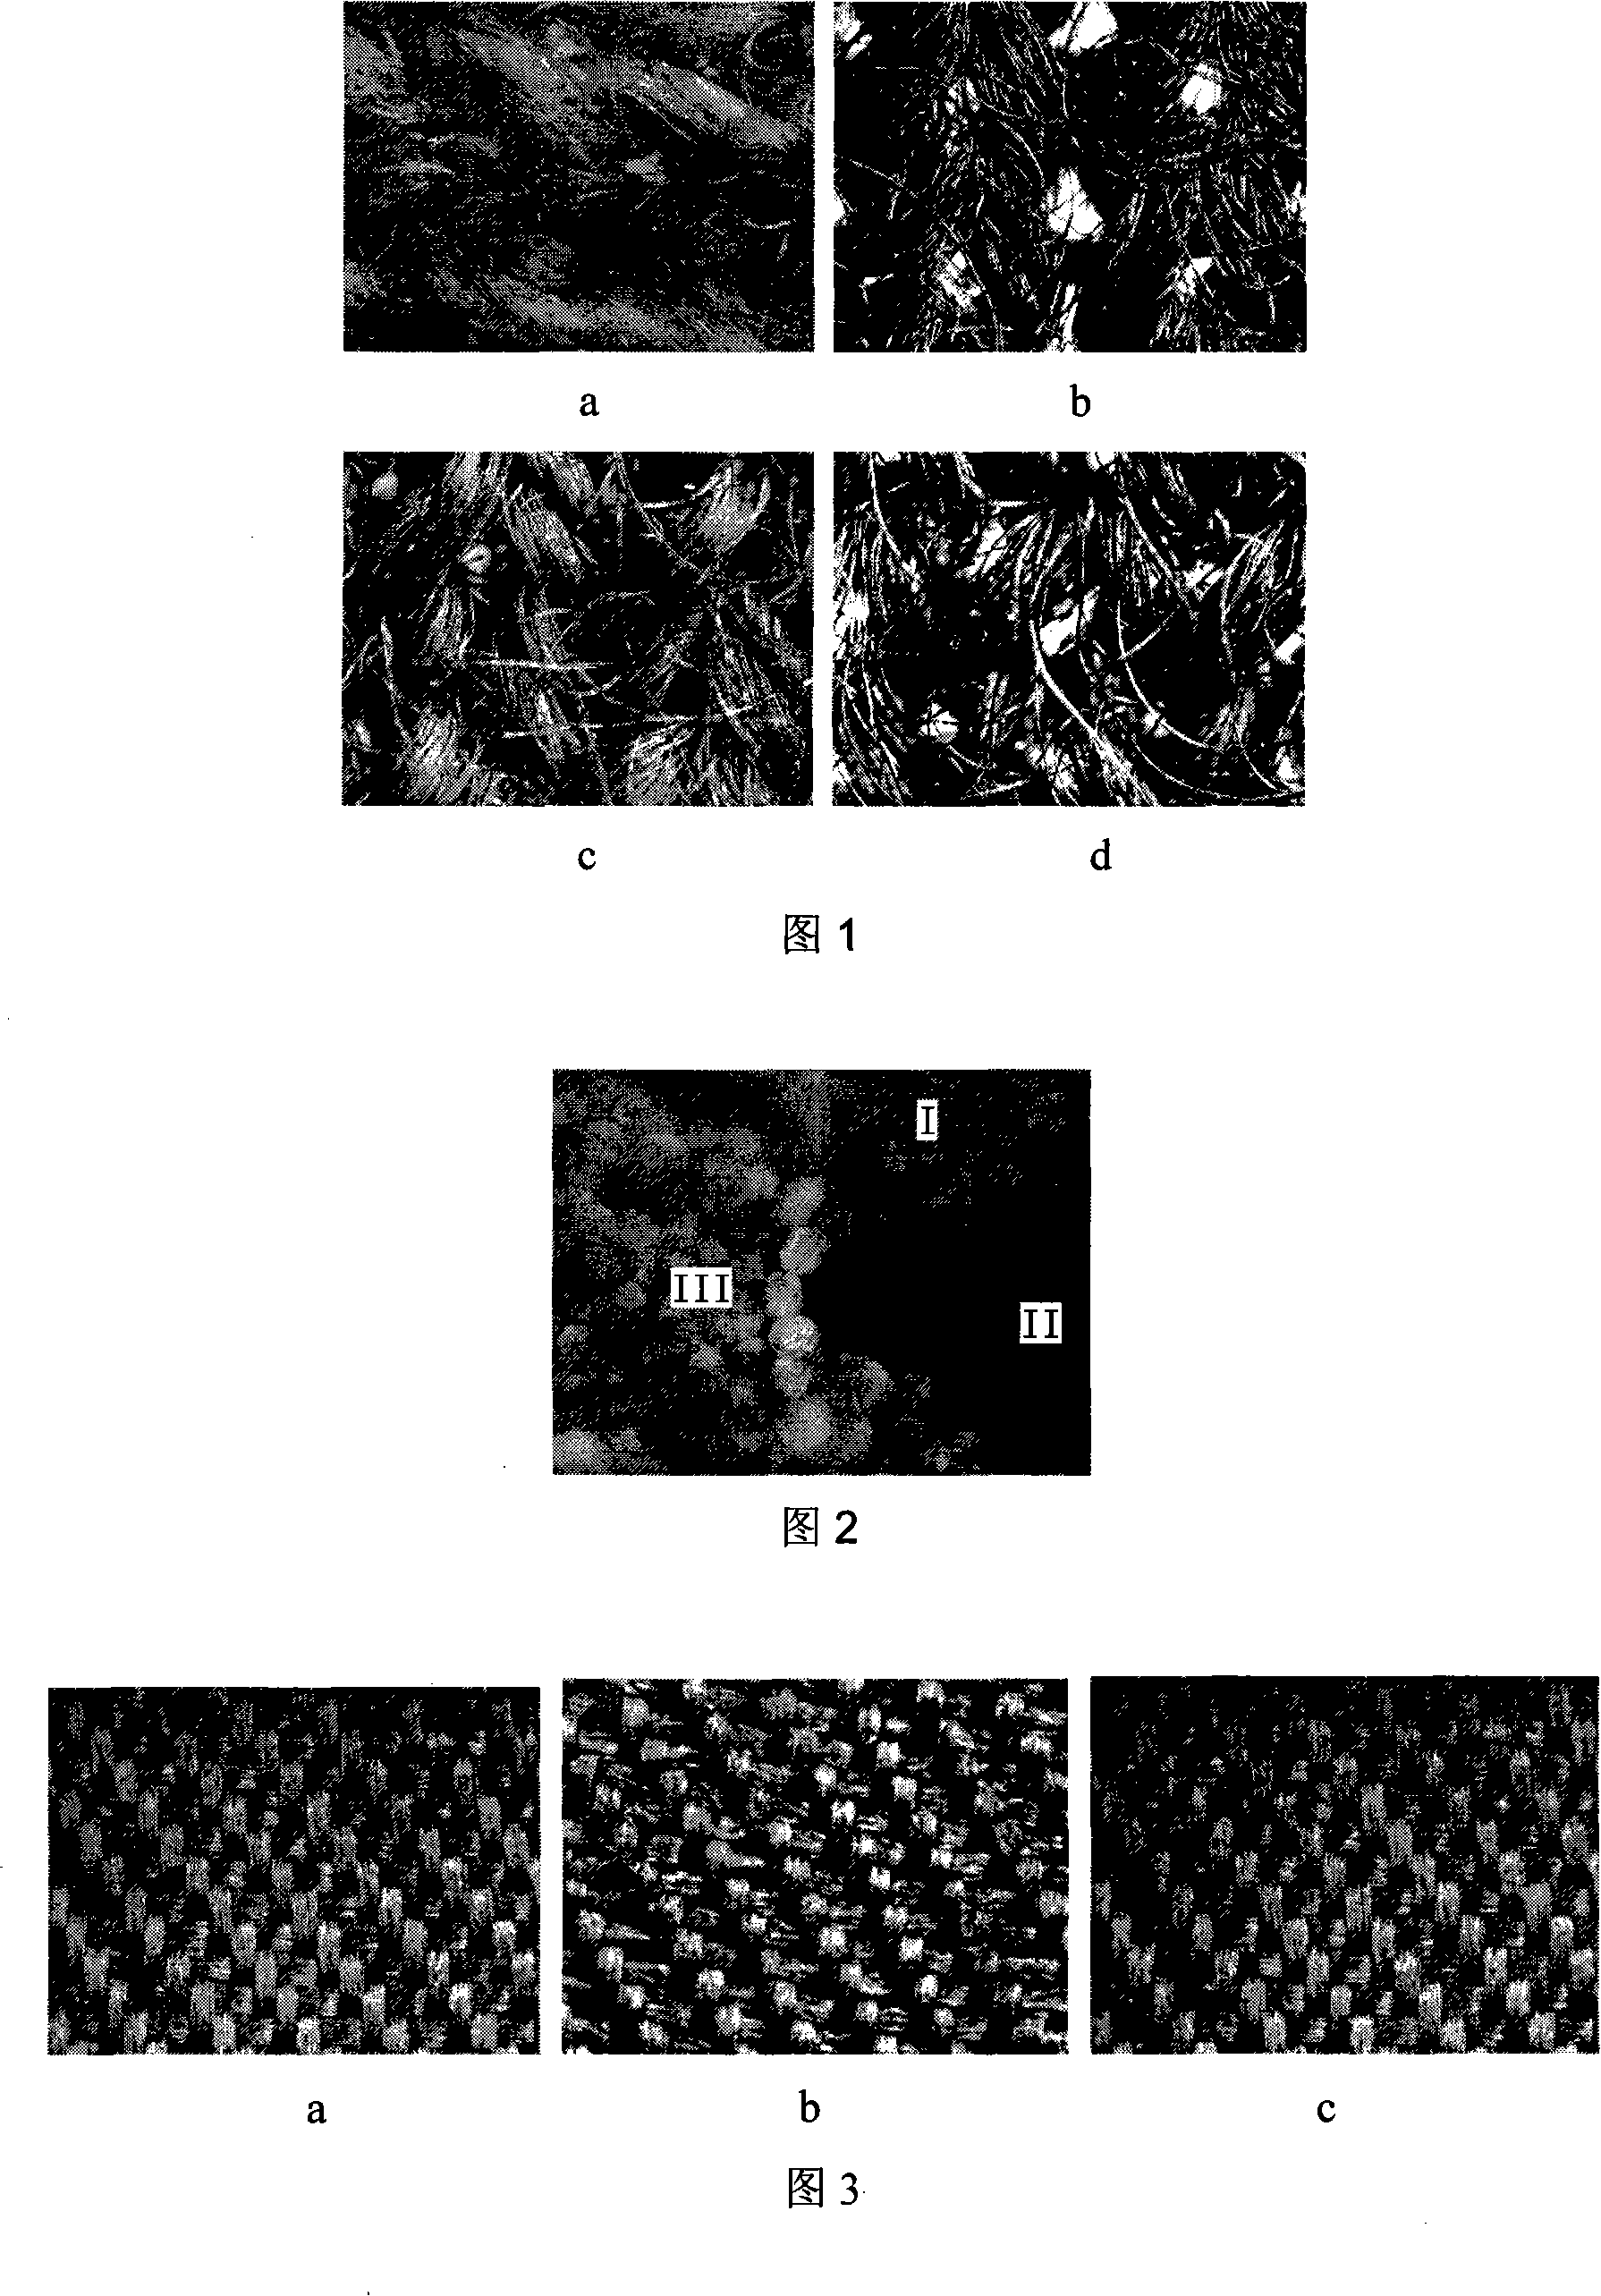 Method for identifying distribution of aminosiloxane sol in textile fibers